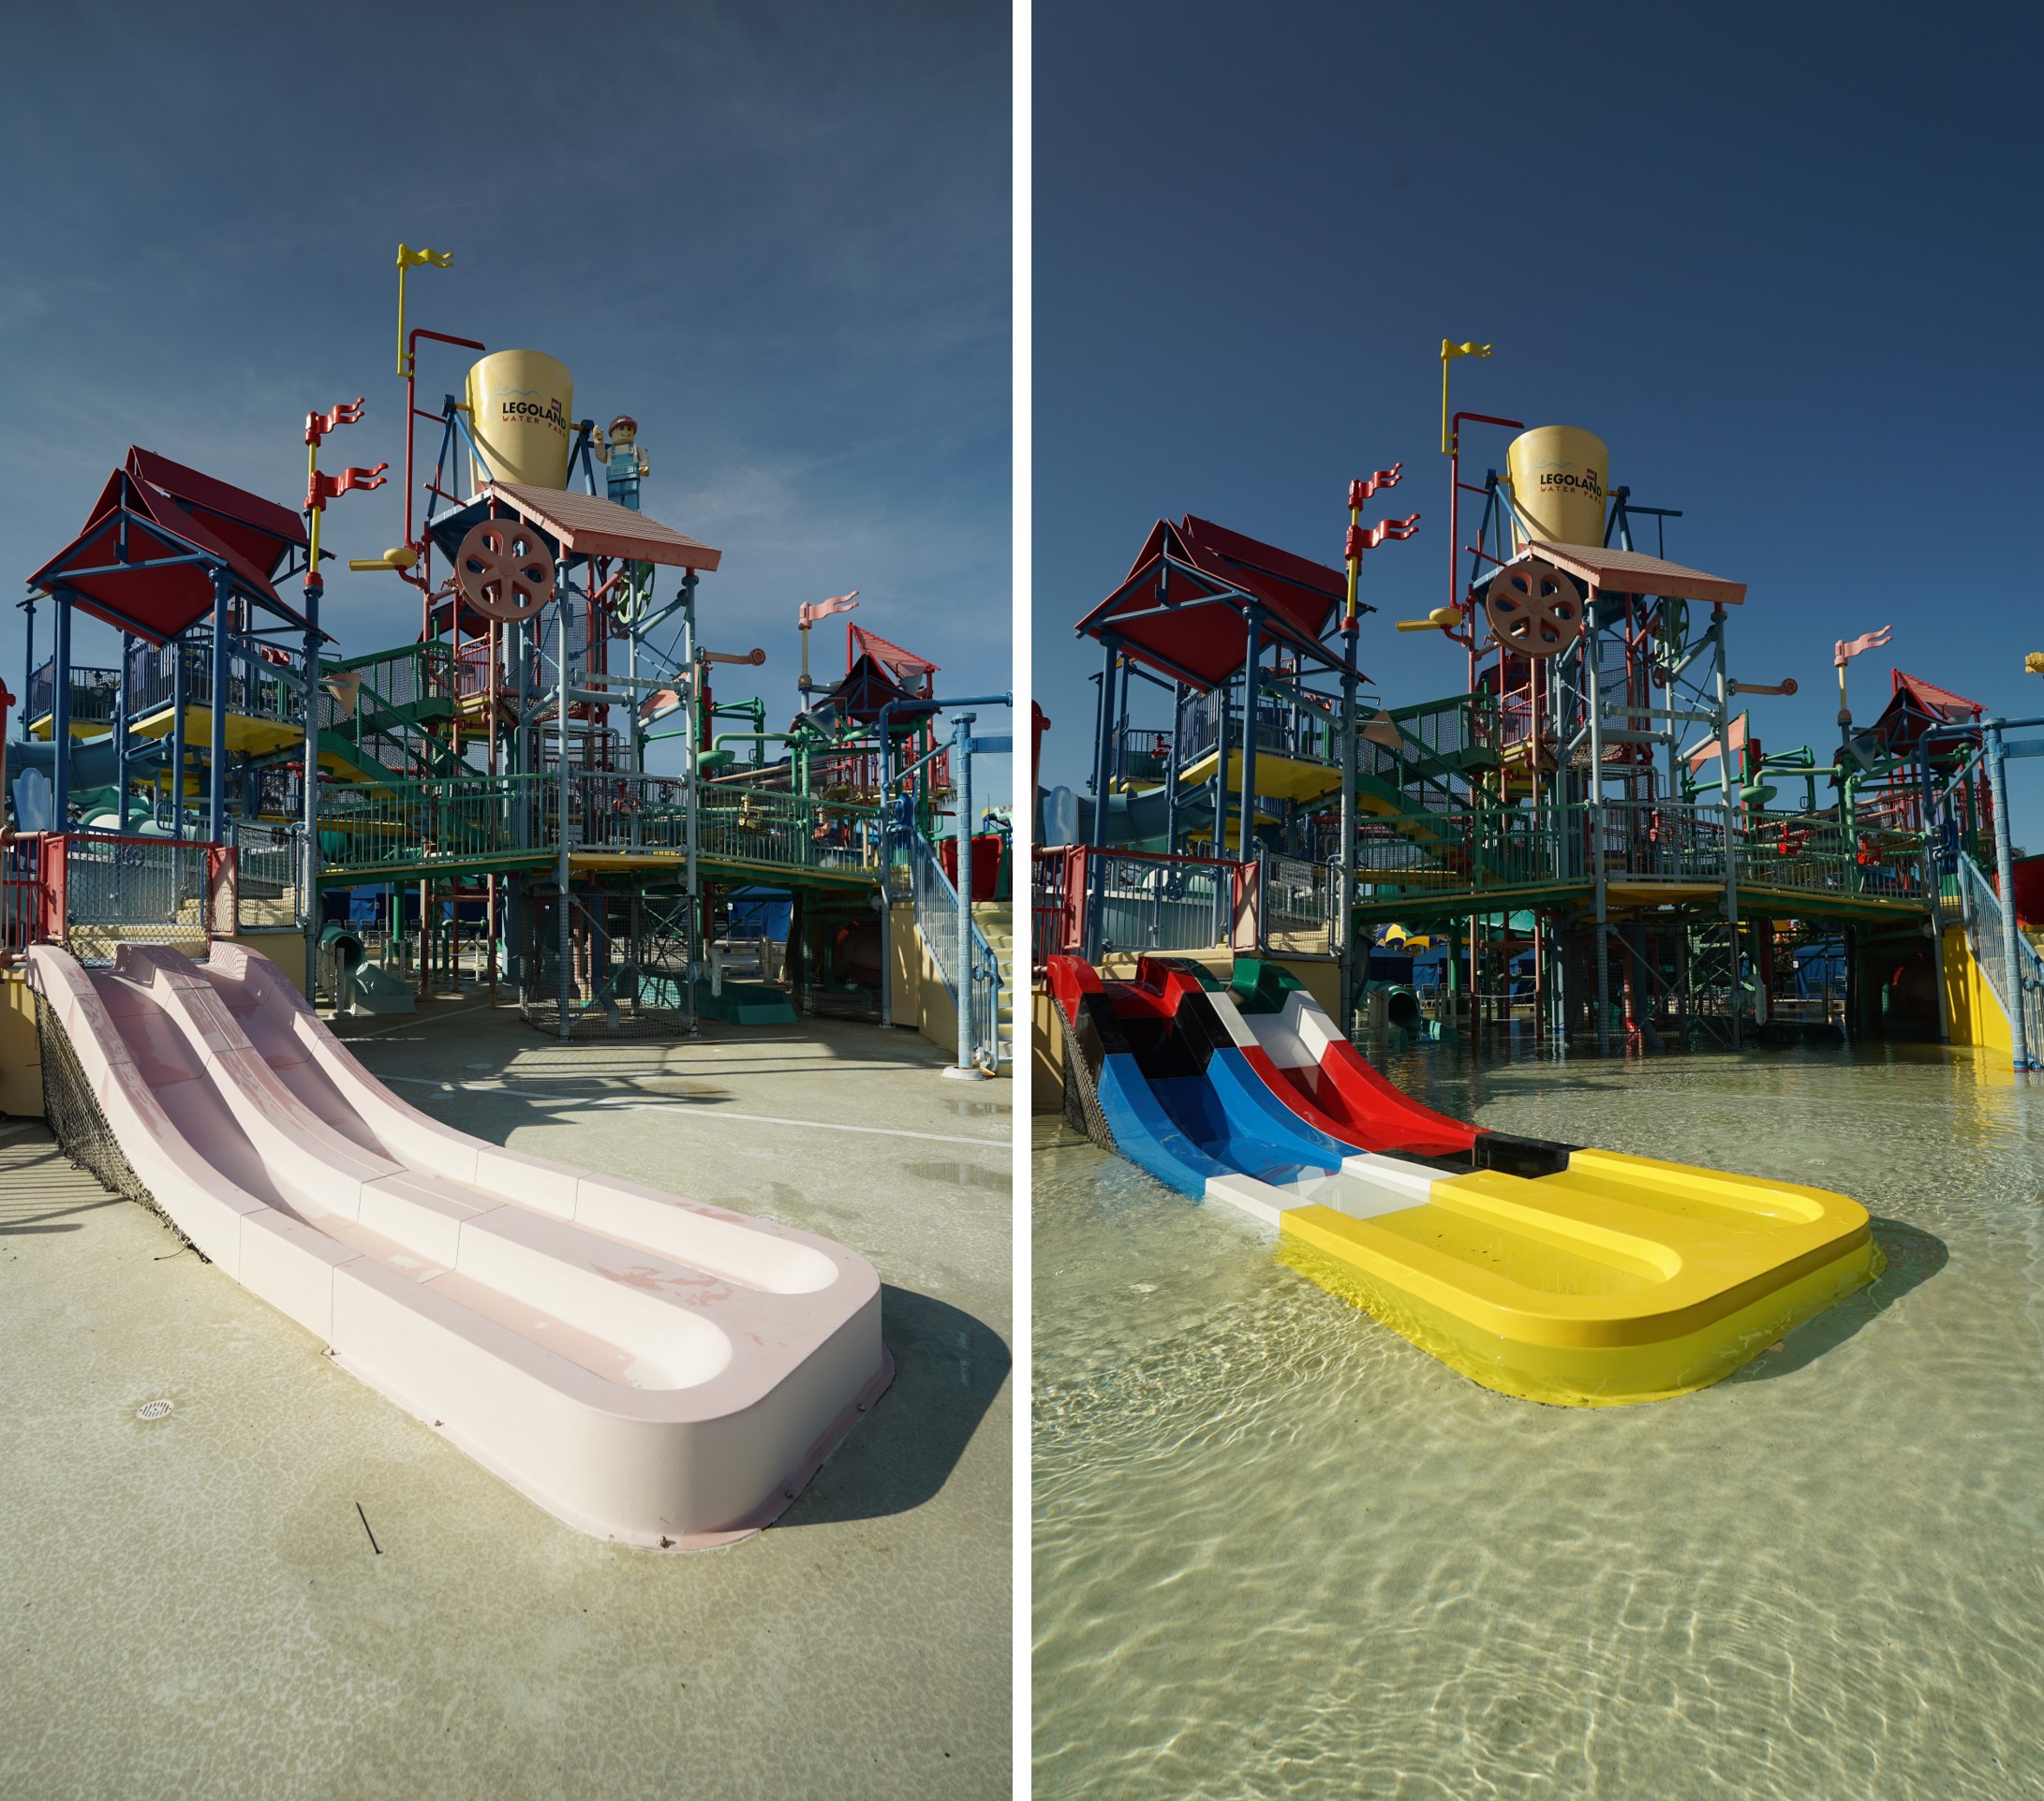 Before and after comparison of refurbished water slide at water park